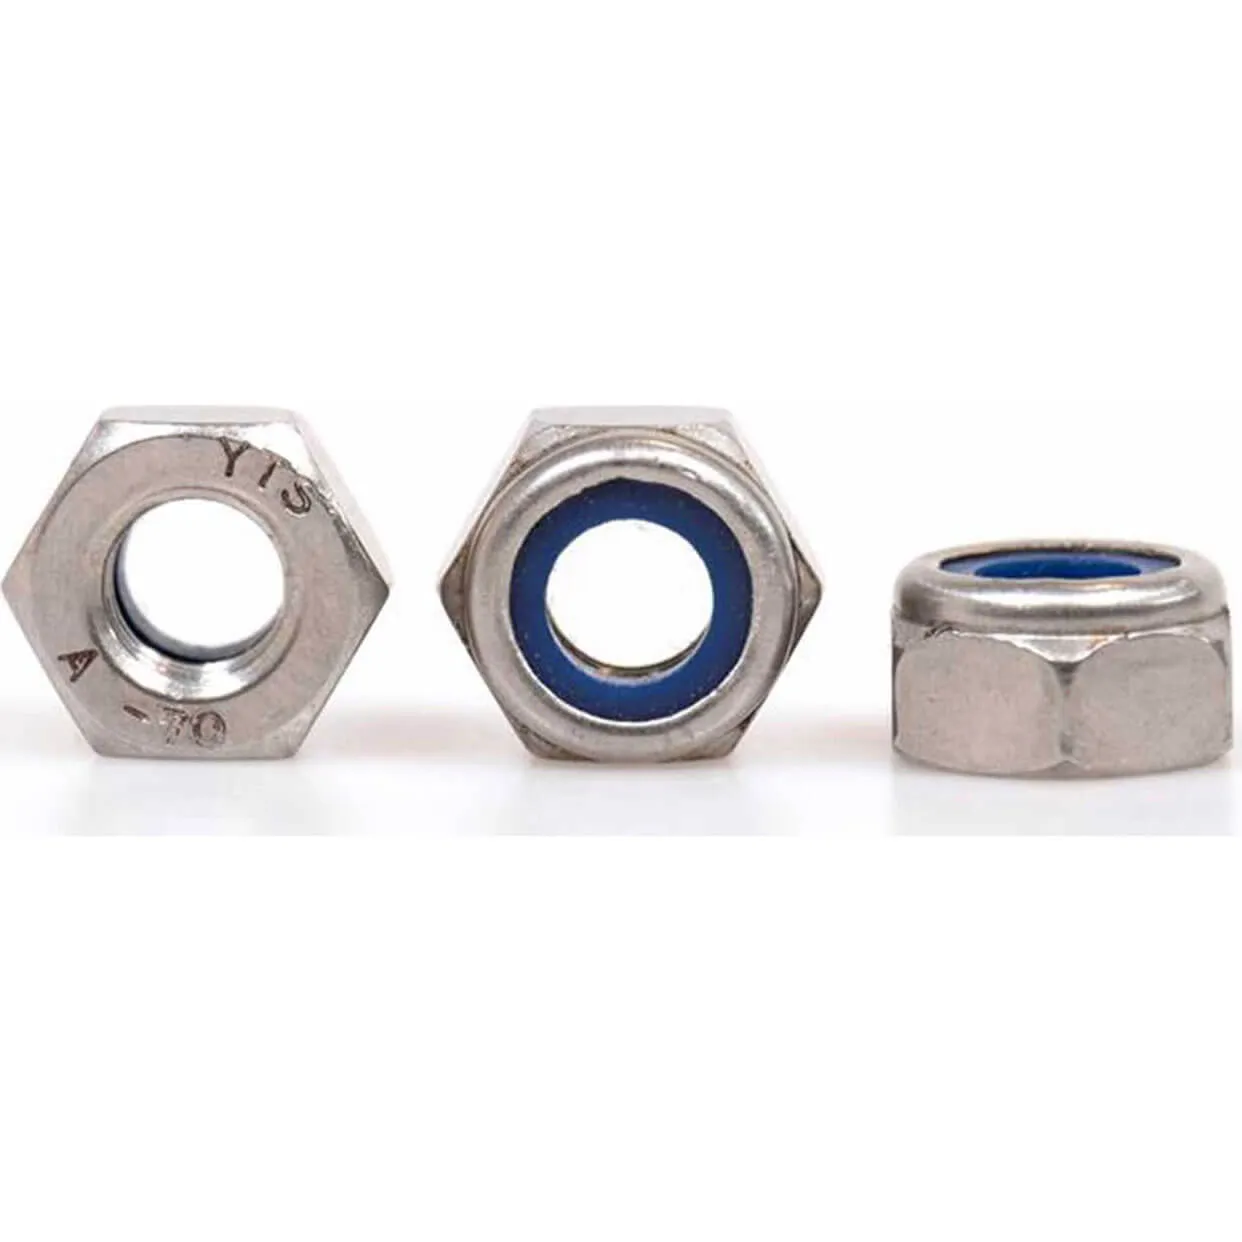 Sirius A4 316 Stainless Steel Nyloc Nuts - M8